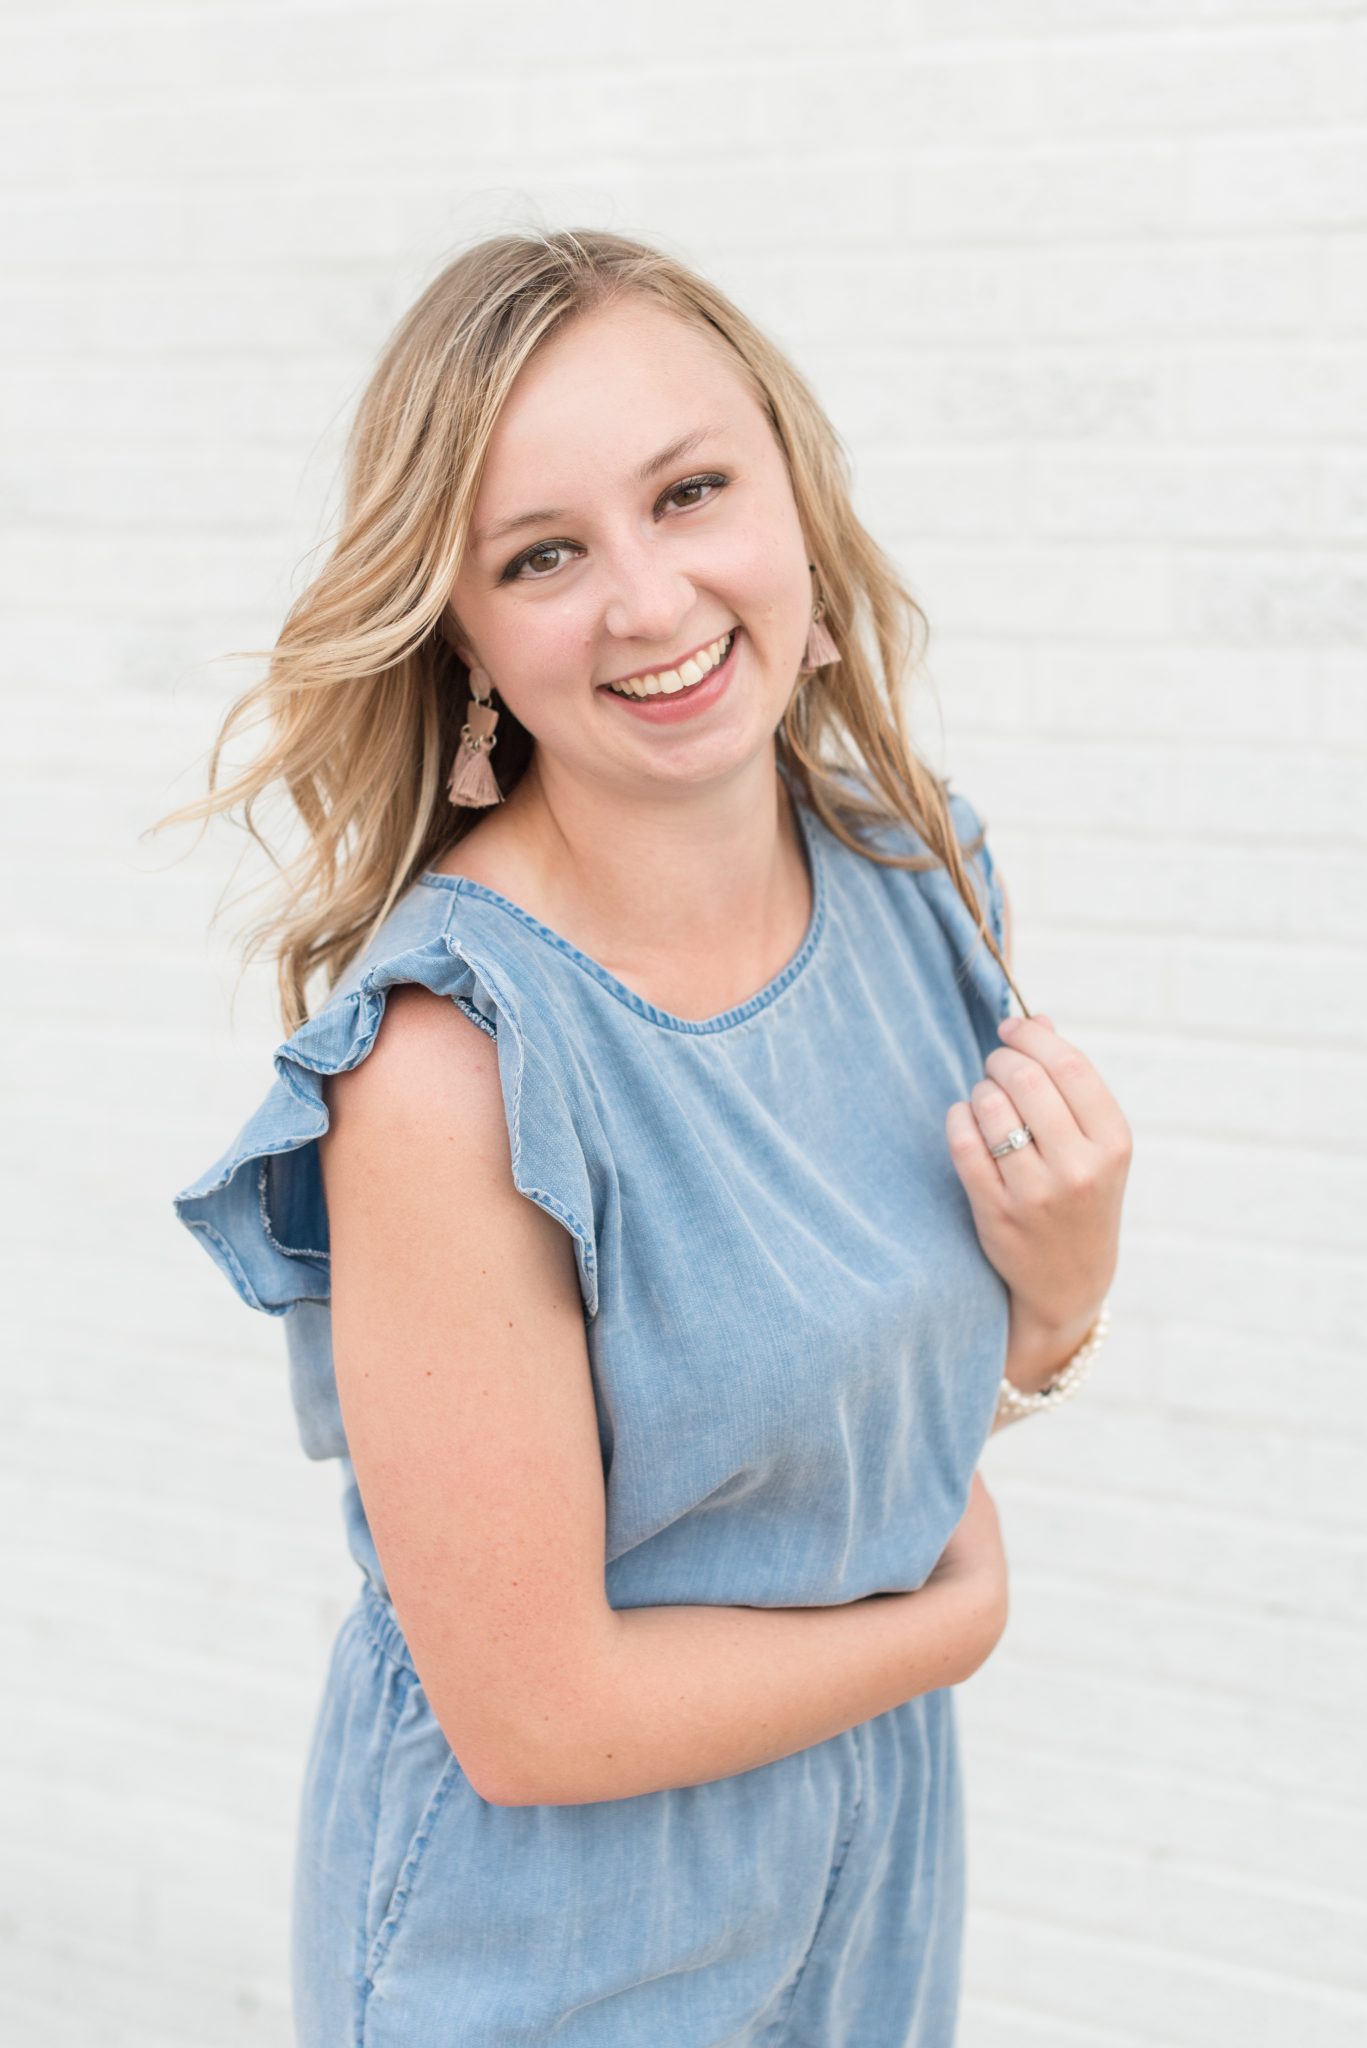 Episode 61: How to Create Connection & Increase Sales via Social Media with Katelyn Workman of Katelyn Workman Photography